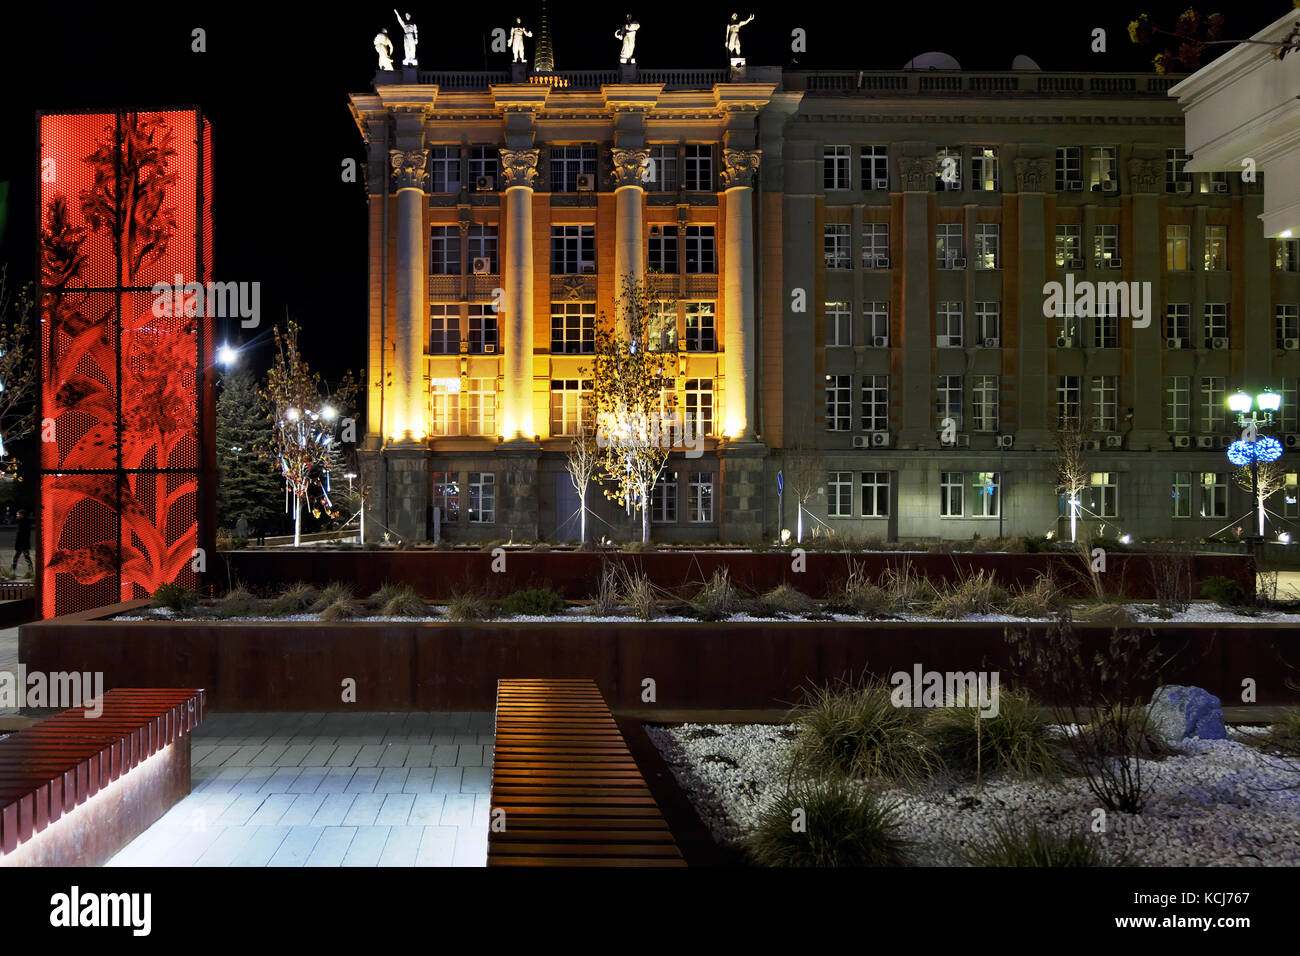 The building of the mayor's office in Ekaterinburg at night with illumination. Stock Photo